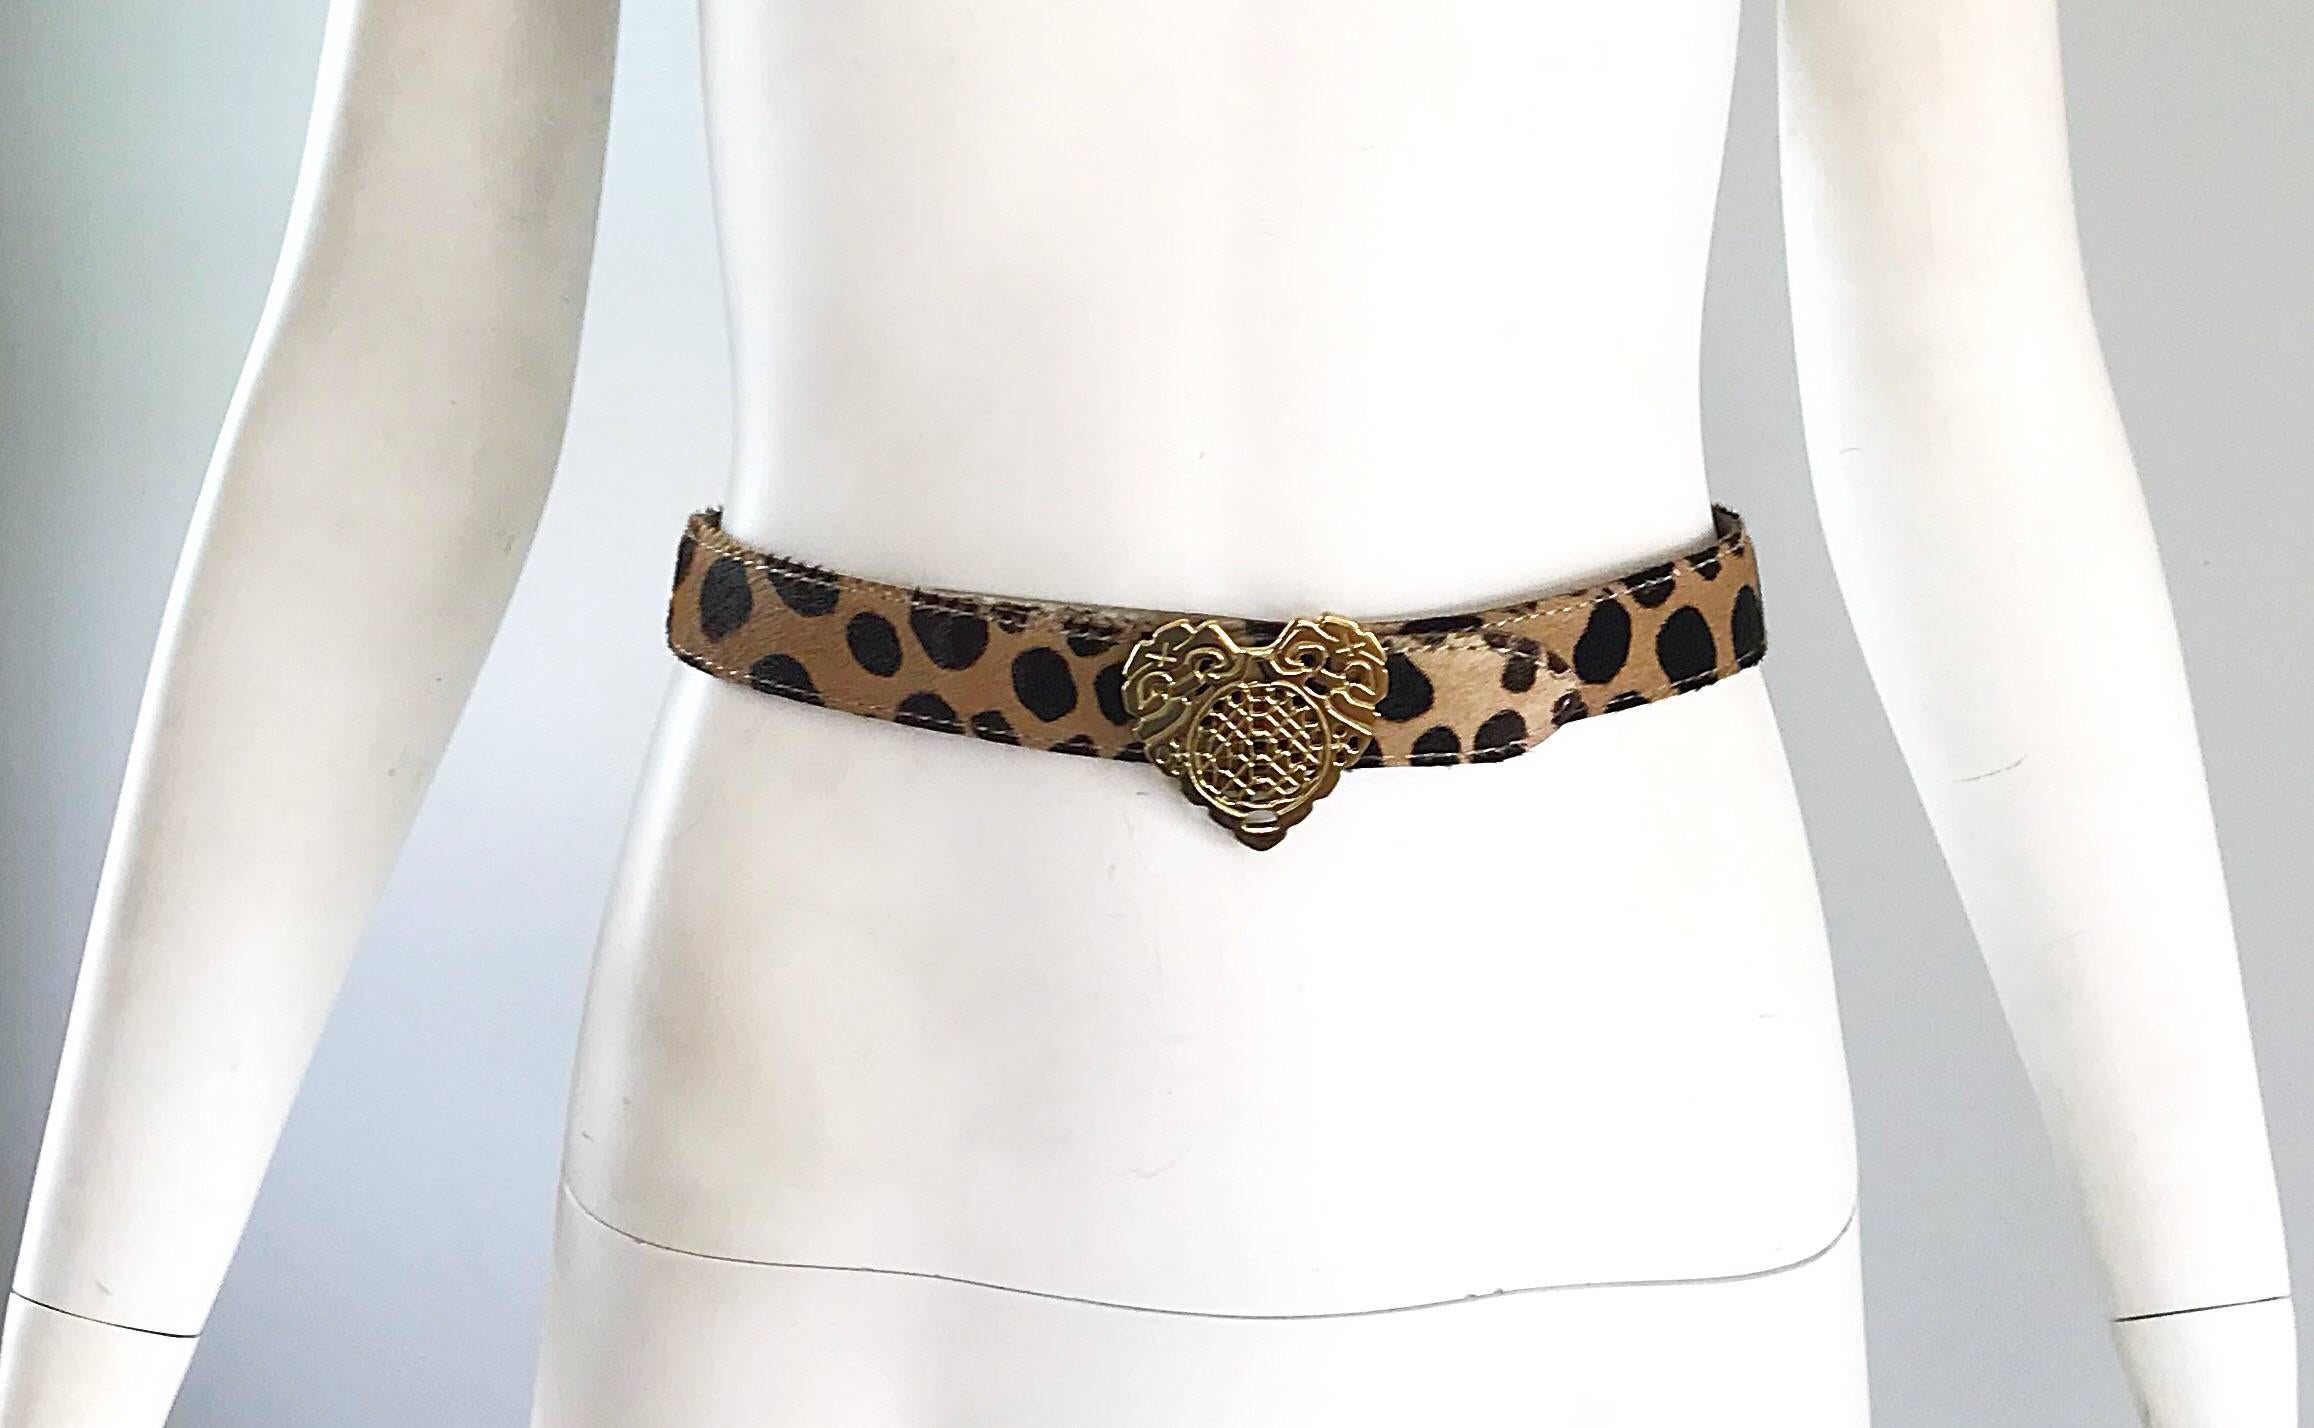 Wonderful vintage MOSCHINO 'CHEAP AND CHIC' pony hair leopard / cheetah print belt! Features soft genuine calf hair, with a gold heart shaped buckle. Great with jeans, a skirt, shorts, or over a dress. In greate condition. Made in